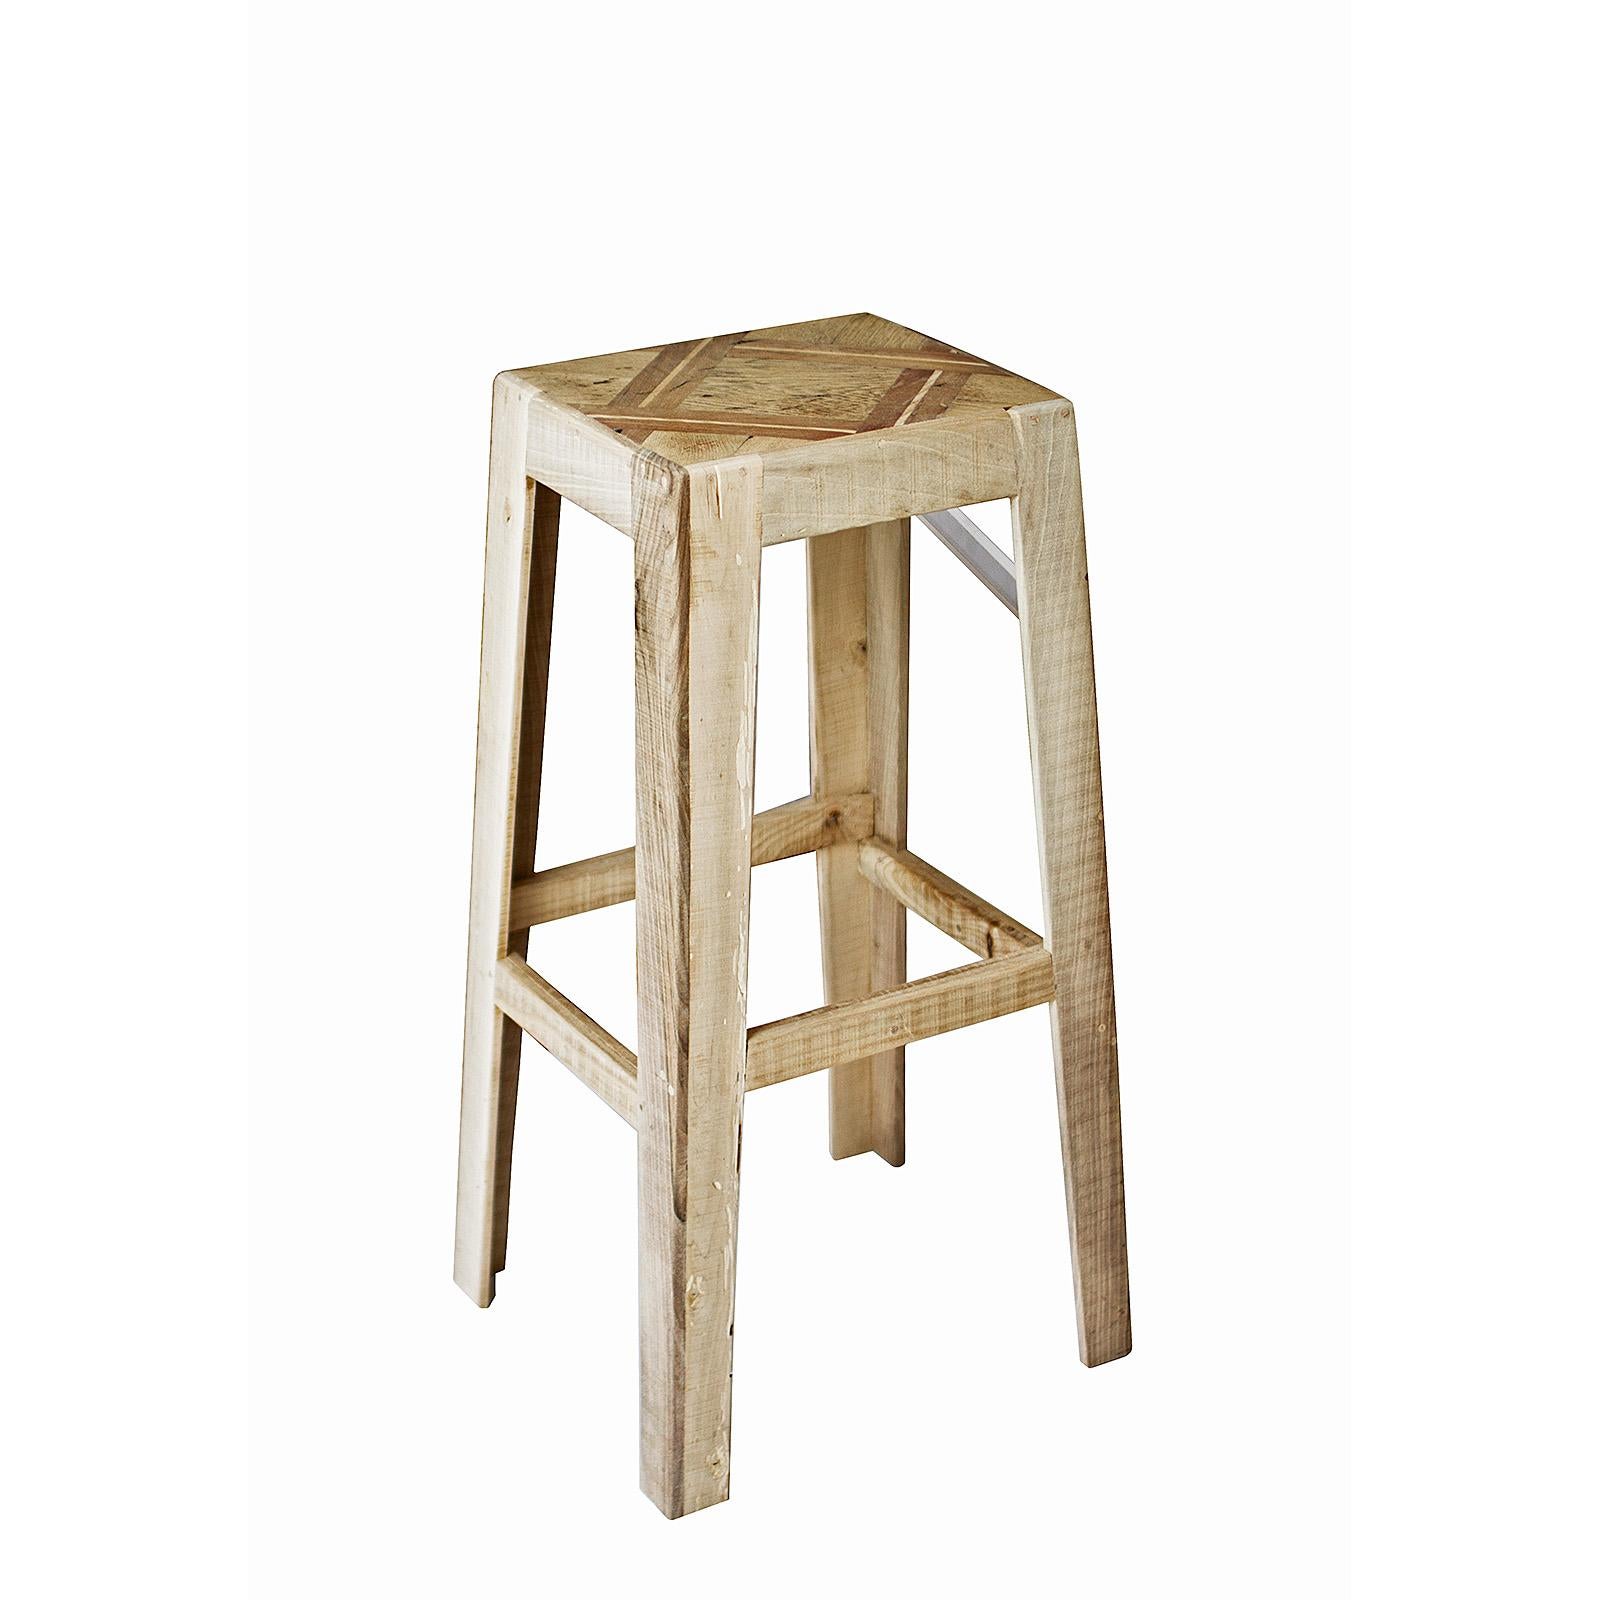 The bar stool is made of an antique piece of walnut wood floorboard, handcrafted Elmwood, and Plexiglass. The footrest heights are all different to accommodate all ages and heights. 

Materials: Nut and Elm Wood, Plexiglass and Screws of Brass. 